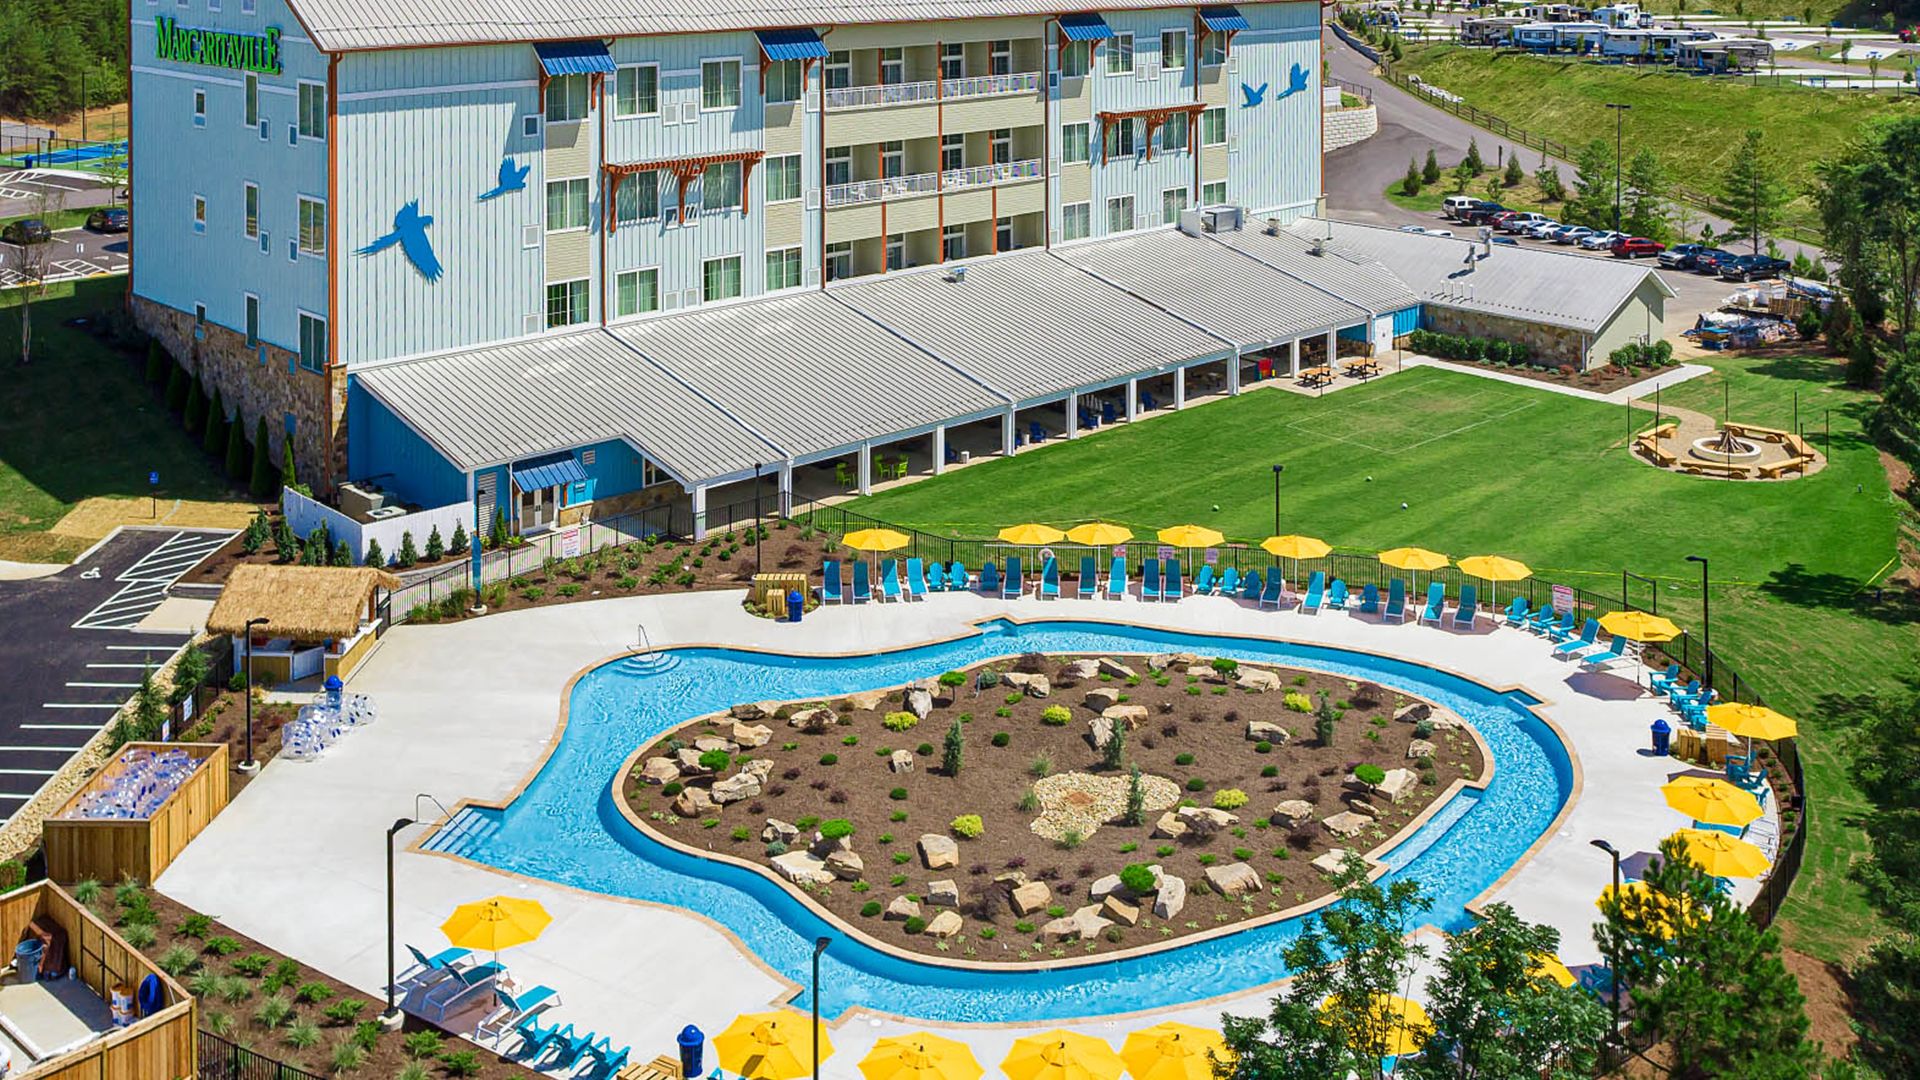 A Large Building With A Pool In Front Of It